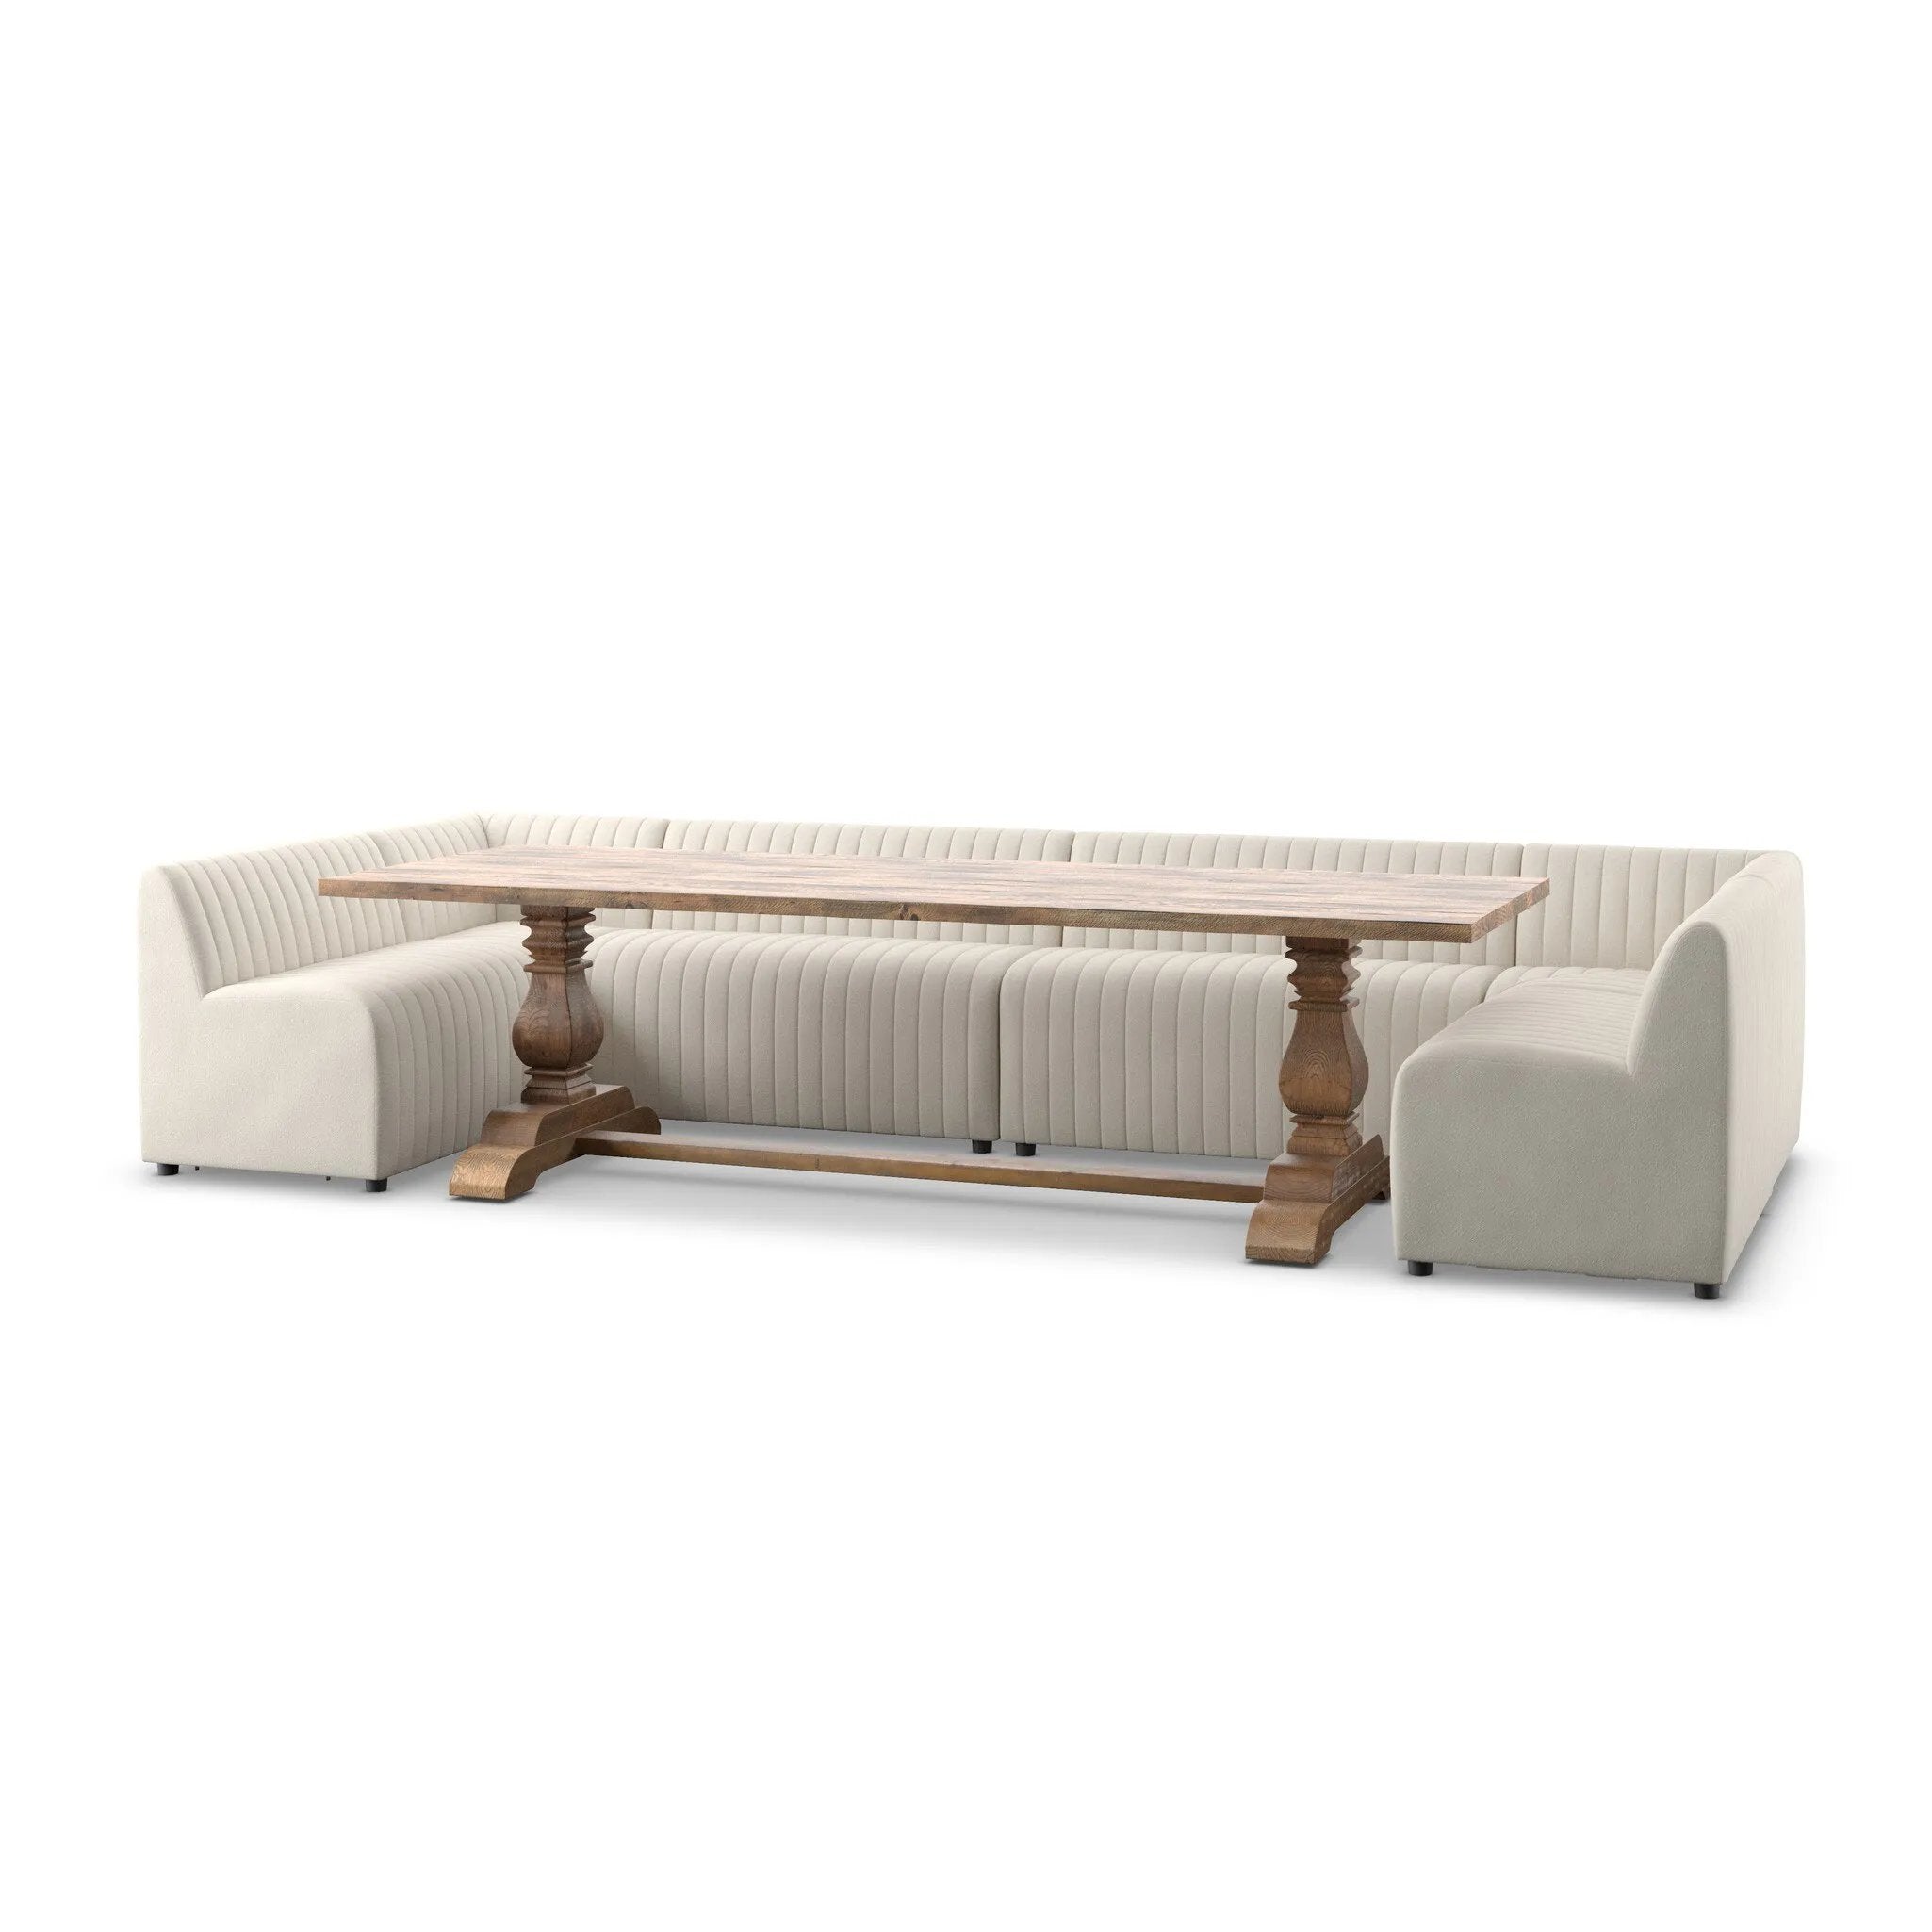 High-performance fabric in a versatile oatmeal hue features dramatic channeling, for trend-forward texture and sumptuous sit. Option to pair with matching pieces for clever modularity.Overall Dimensions154.00"w x 66.50"d x 31.50"hFull Details &amp; SpecificationsTear SheetBack Cushion Attachment : Fixe Amethyst Home provides interior design, new home construction design consulting, vintage area rugs, and lighting in the Des Moines metro area.